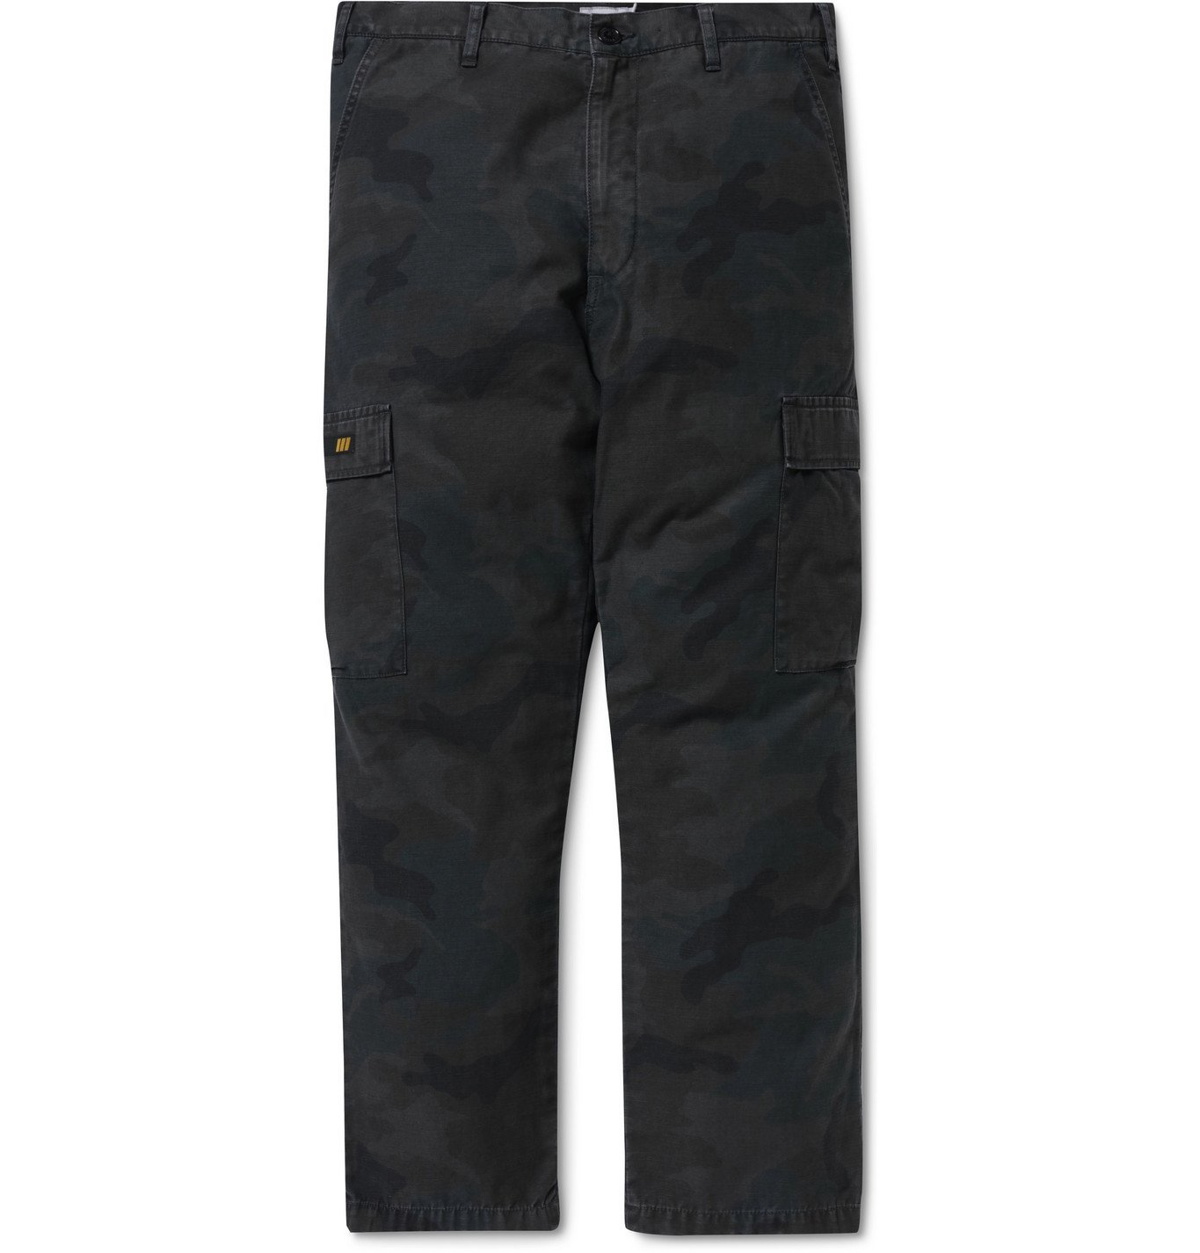 WTAPS - Jungle Garment-Dyed Camouflage-Print Cotton Cargo Trousers